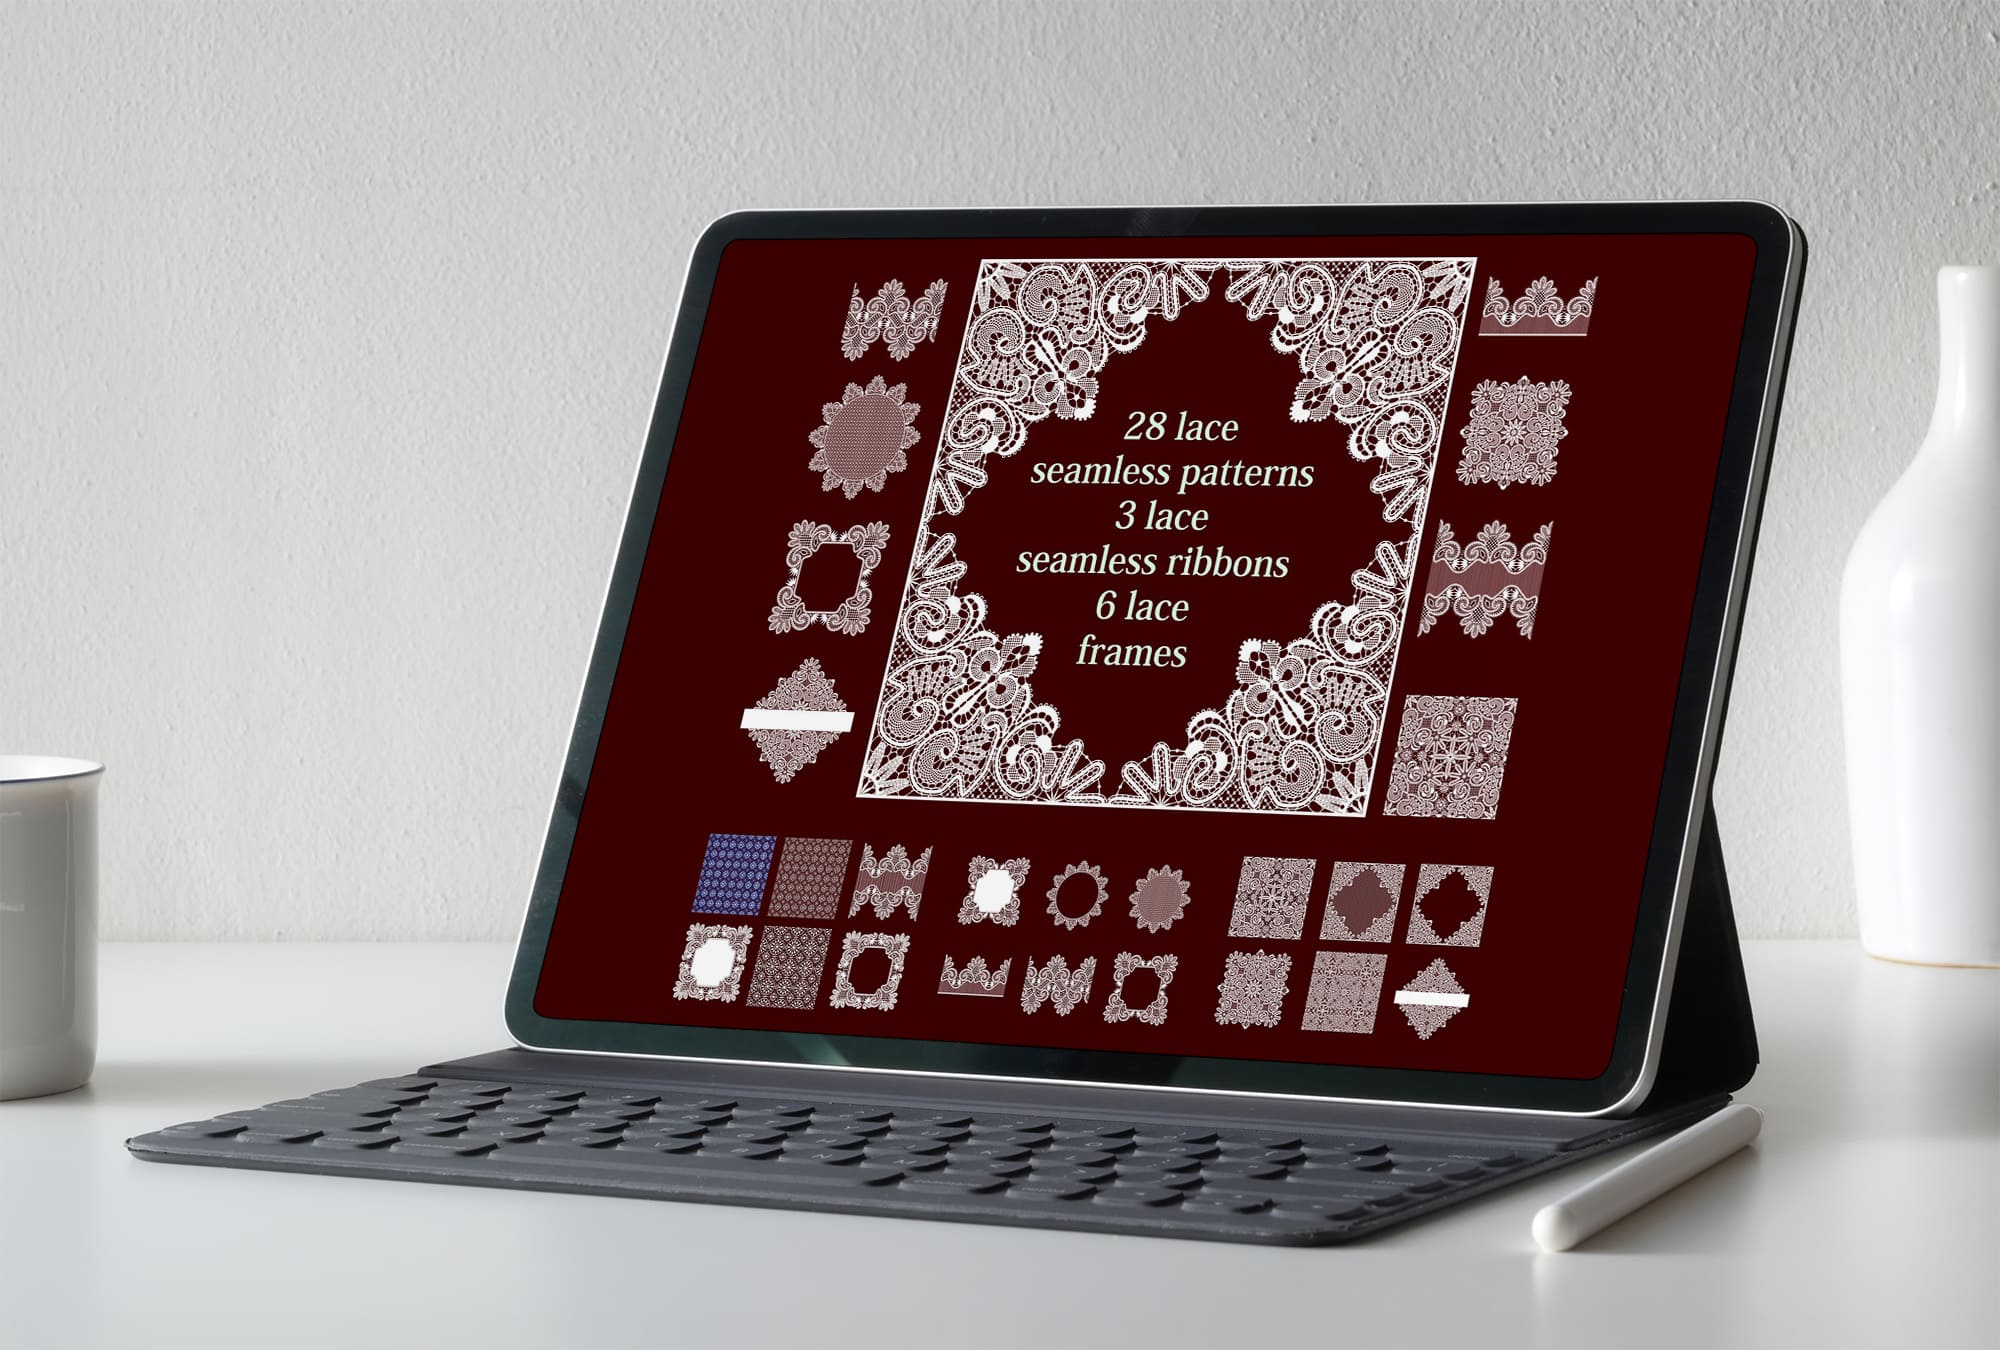 Lace Patterns Collection on the IPad Mockup.